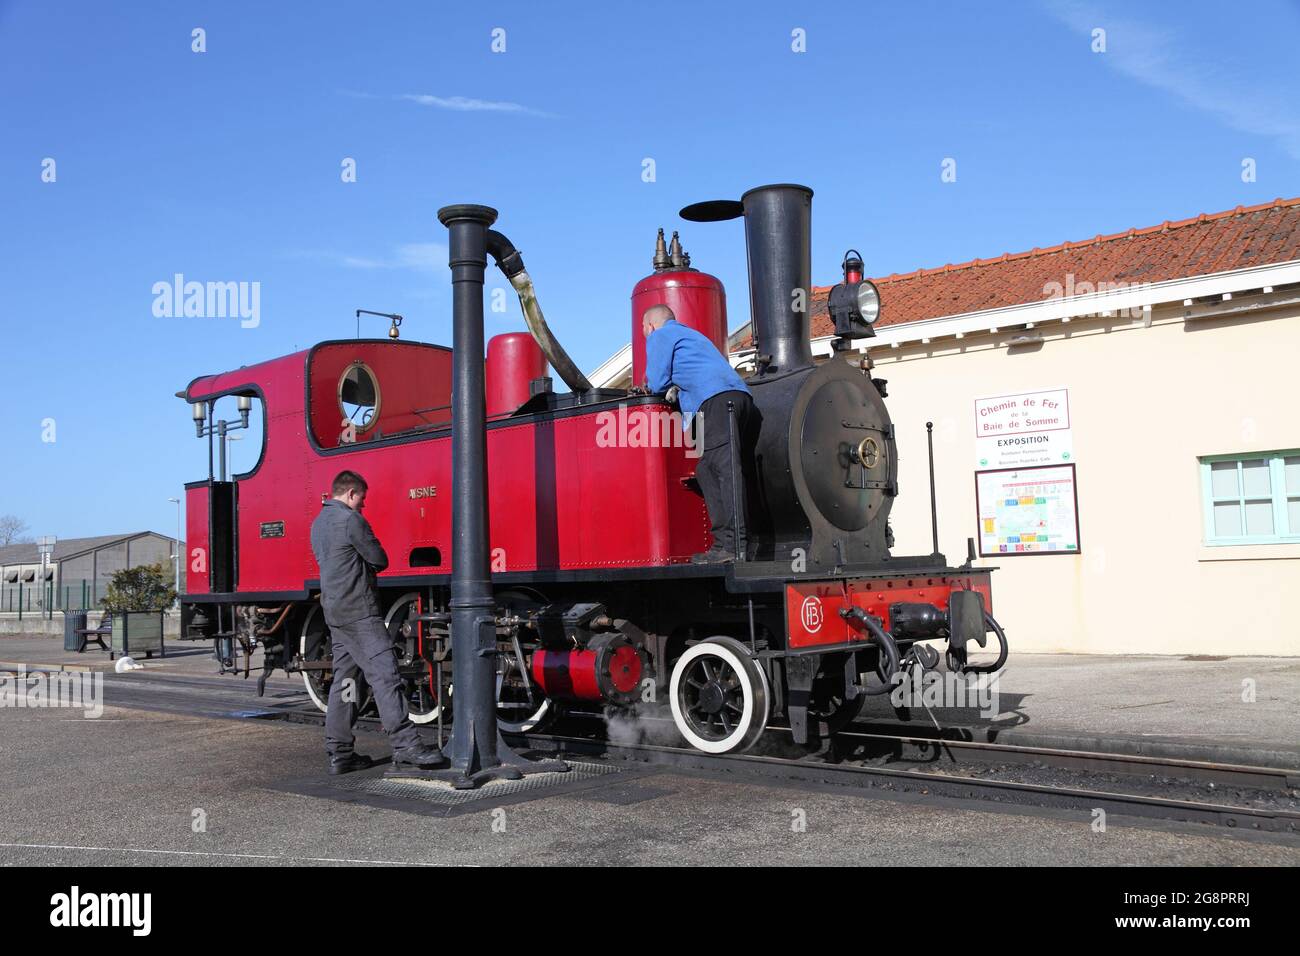 St Valery-sur-Somme Steam train, Picardy, France Stock Photo